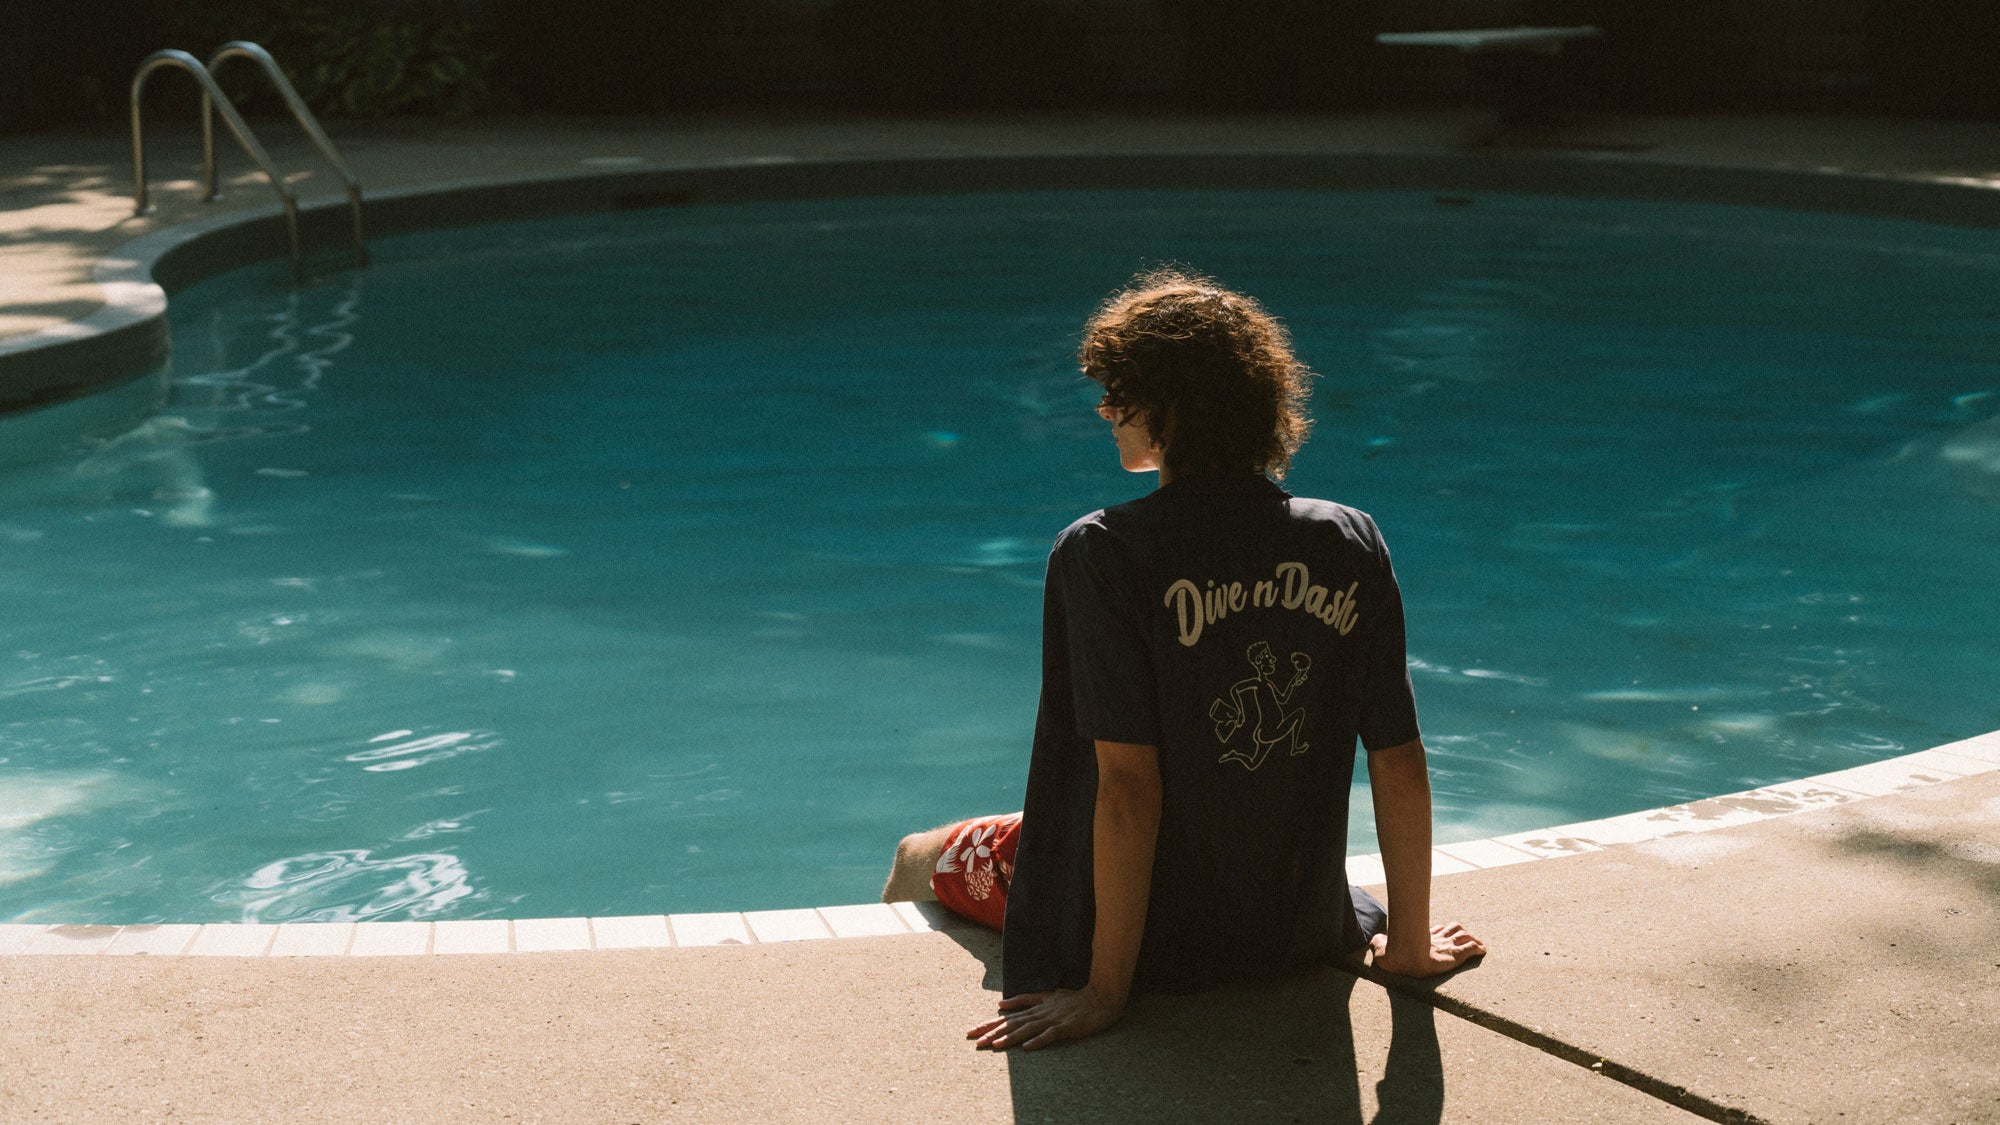 A model sitting by the pool wearing Bather's navy embroidered Dive n' Dash Camp Shirt